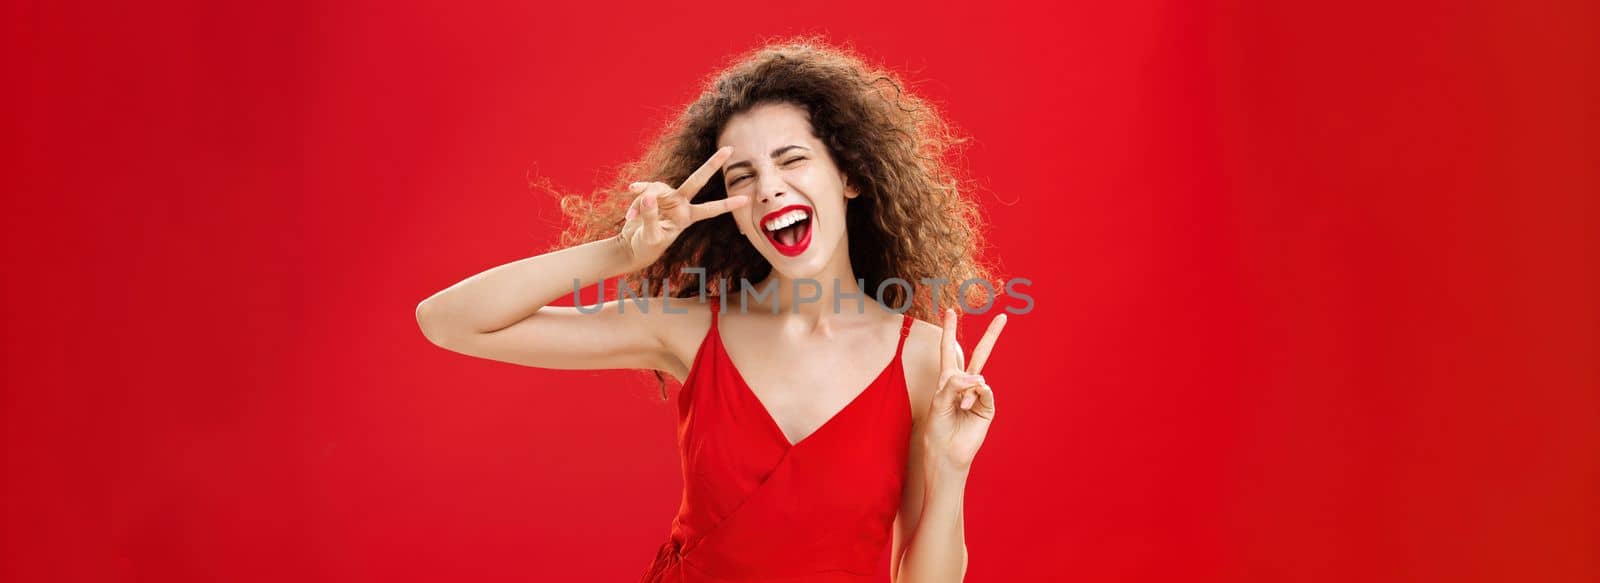 Outgoing friendly and carefree young rebellious woman with curly hairstyle in red stylish dress showing peace signs as if dancing disco enjoying awesome party having fun against studio background by Benzoix